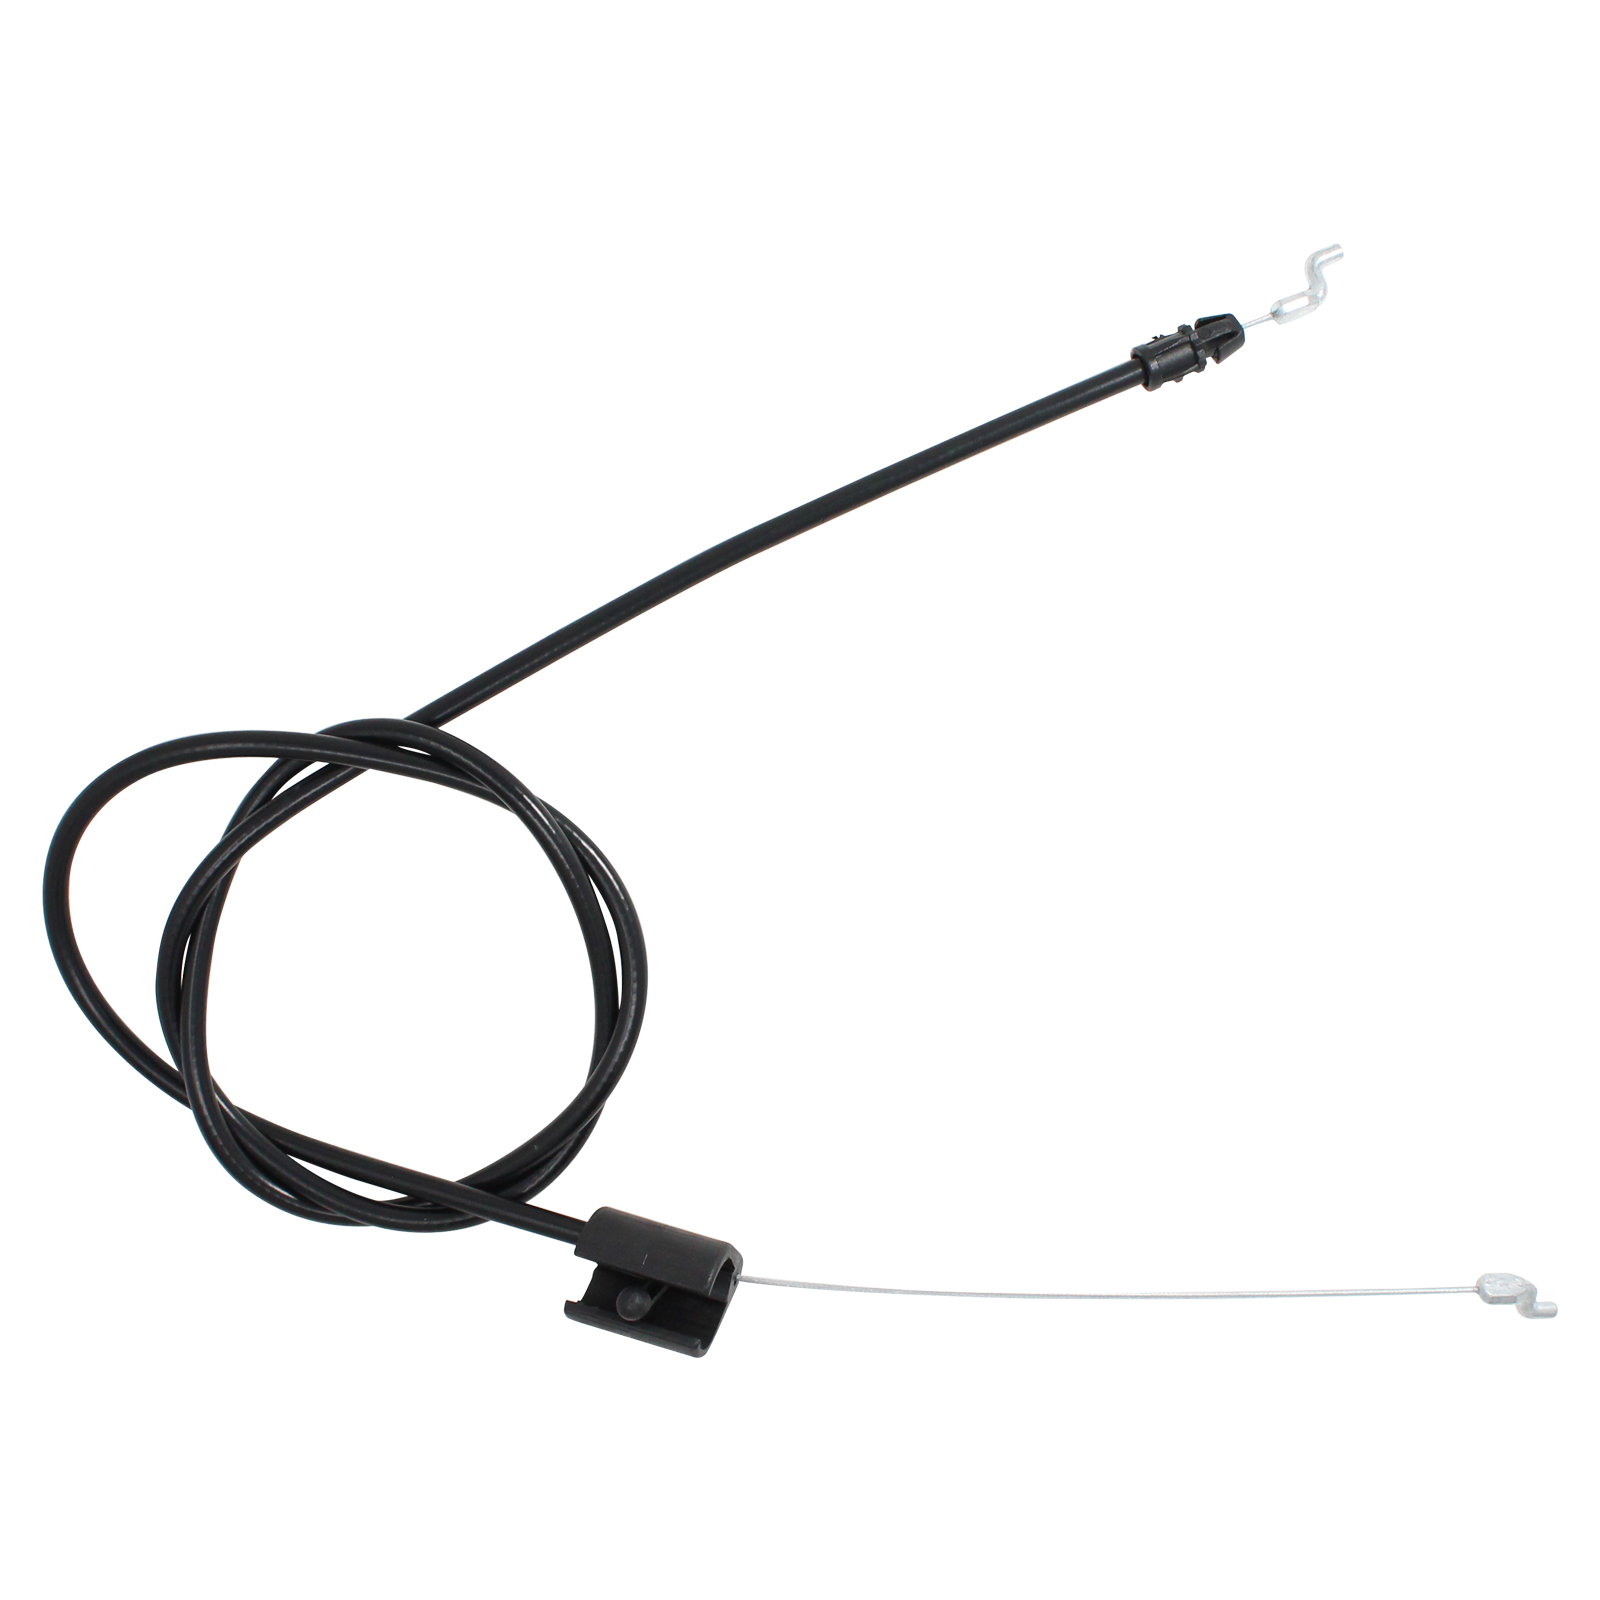 532176556 Engine Cable Replacement for Husqvarna ROTARY LAWN MOWER (96114000708) (2007-05) Lawn Mower: Consumer Walk Behind - Compatible with 176556 162778 Zone Control Cable - image 4 of 4